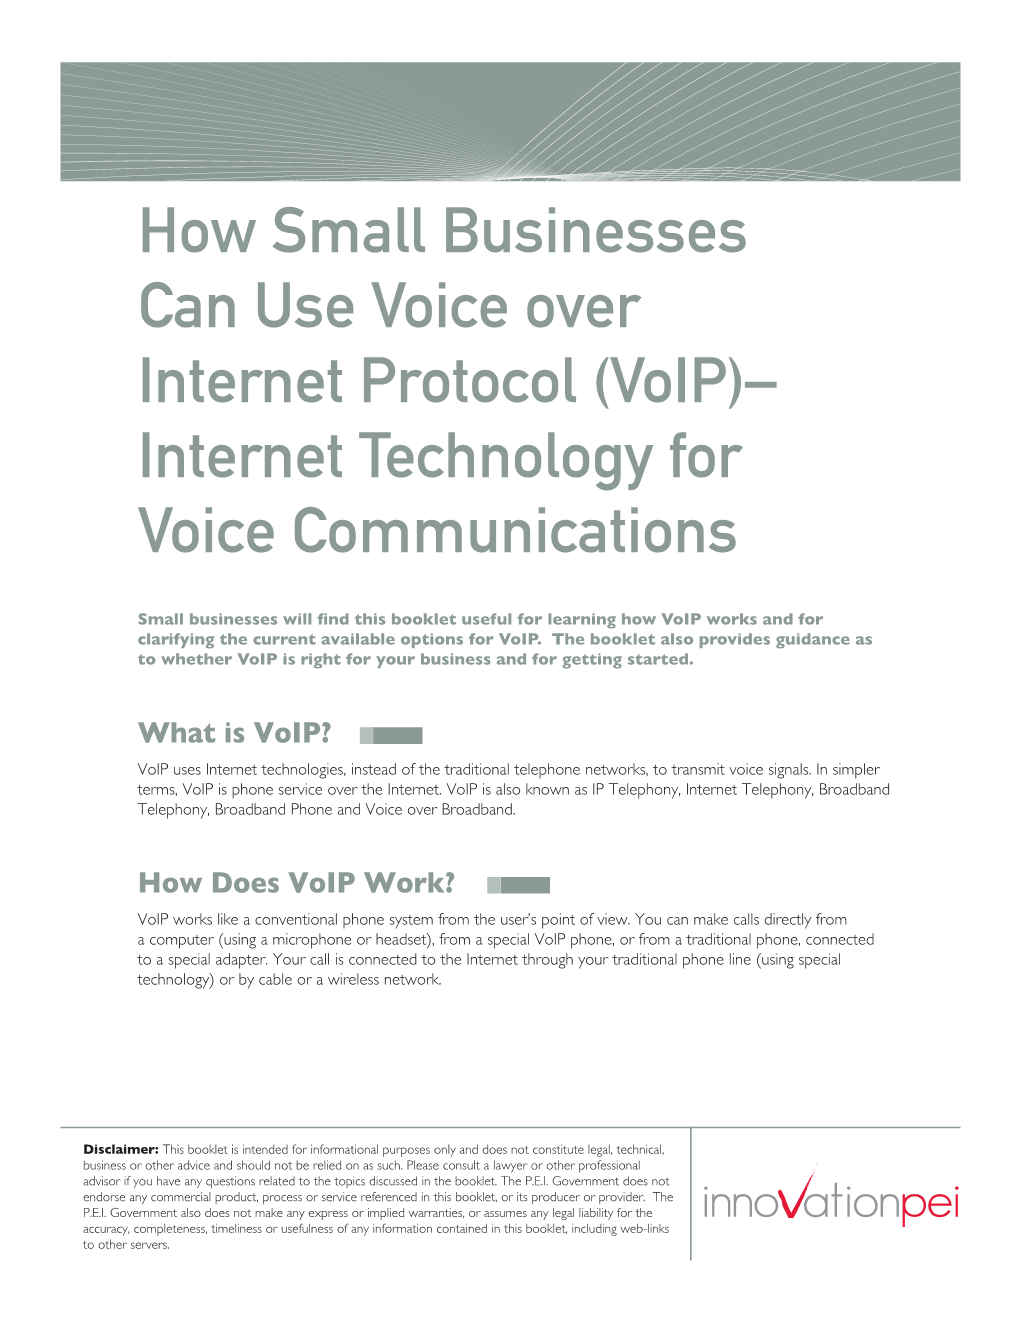 How Small Businesses Can Use Voice Over Internet Protocol (Voip)– Internet Technology for Voice Communications